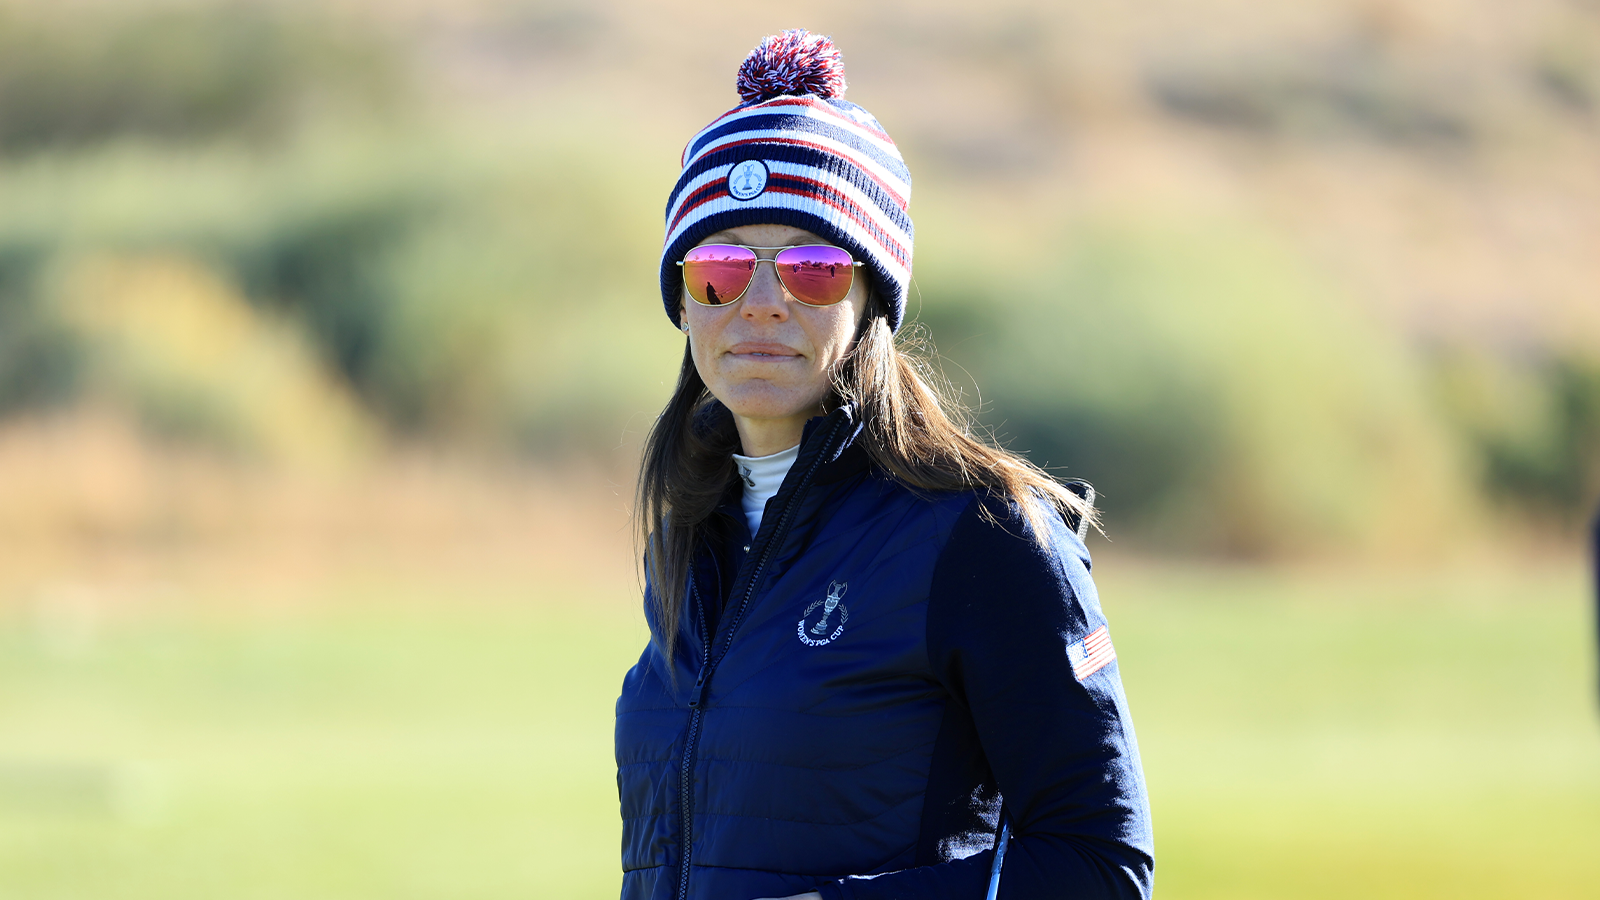 Joanna Coe of Team USA looks on during a practice round for the 2nd PGA Women's Cup at Twin Warriors Golf Club on Tuesday, October 25, 2022 in Santa Ana Pueblo, New Mexico. (Photo by Sam Greenwood/PGA of America)